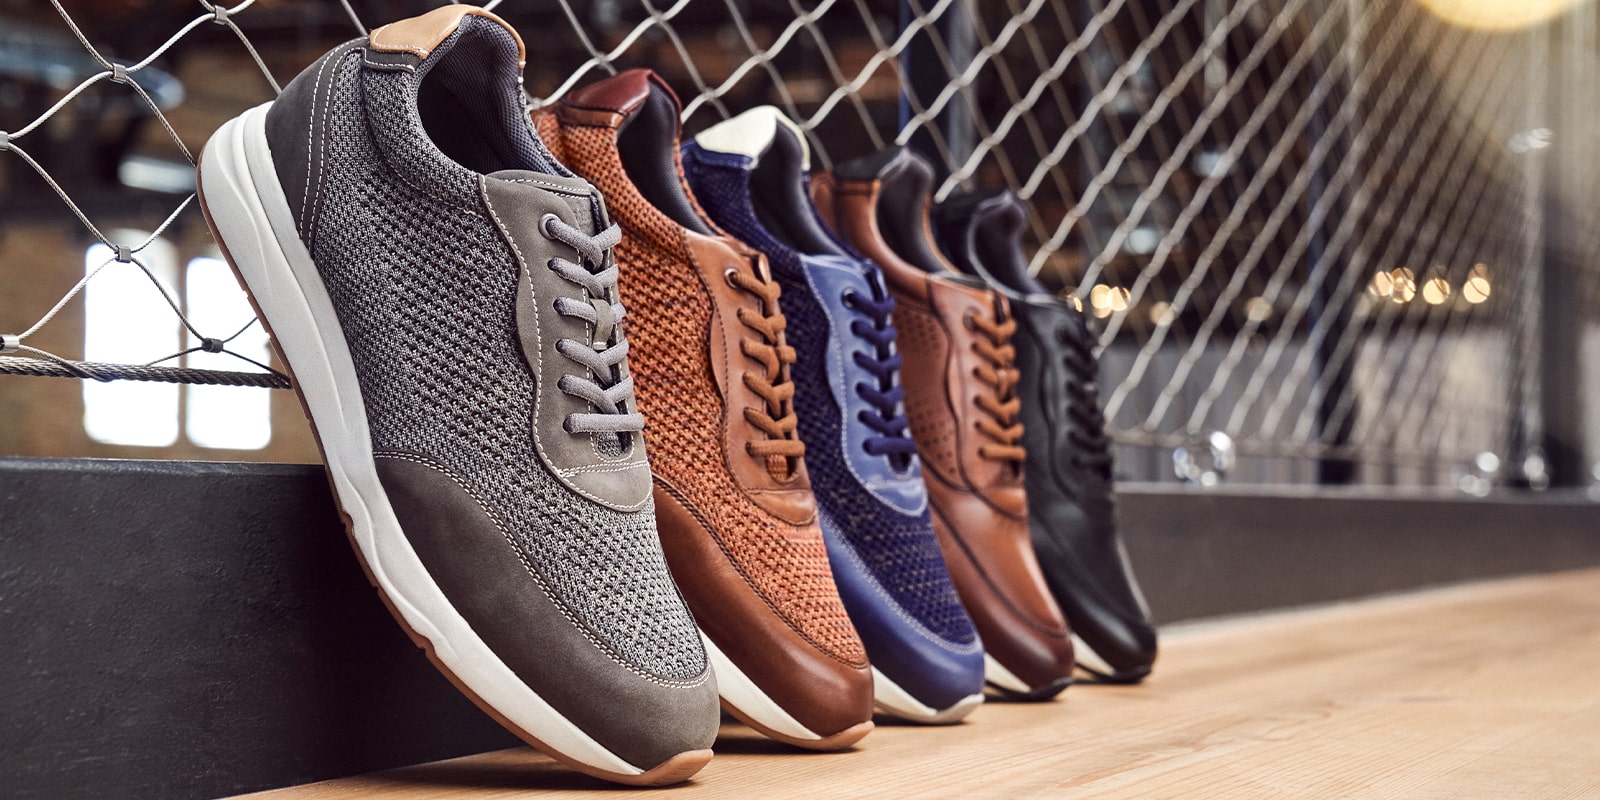 The featured products are the Formula Knit Moc Toe Lace Up Sneakers in Gray, Cognac Multi, and Navy.